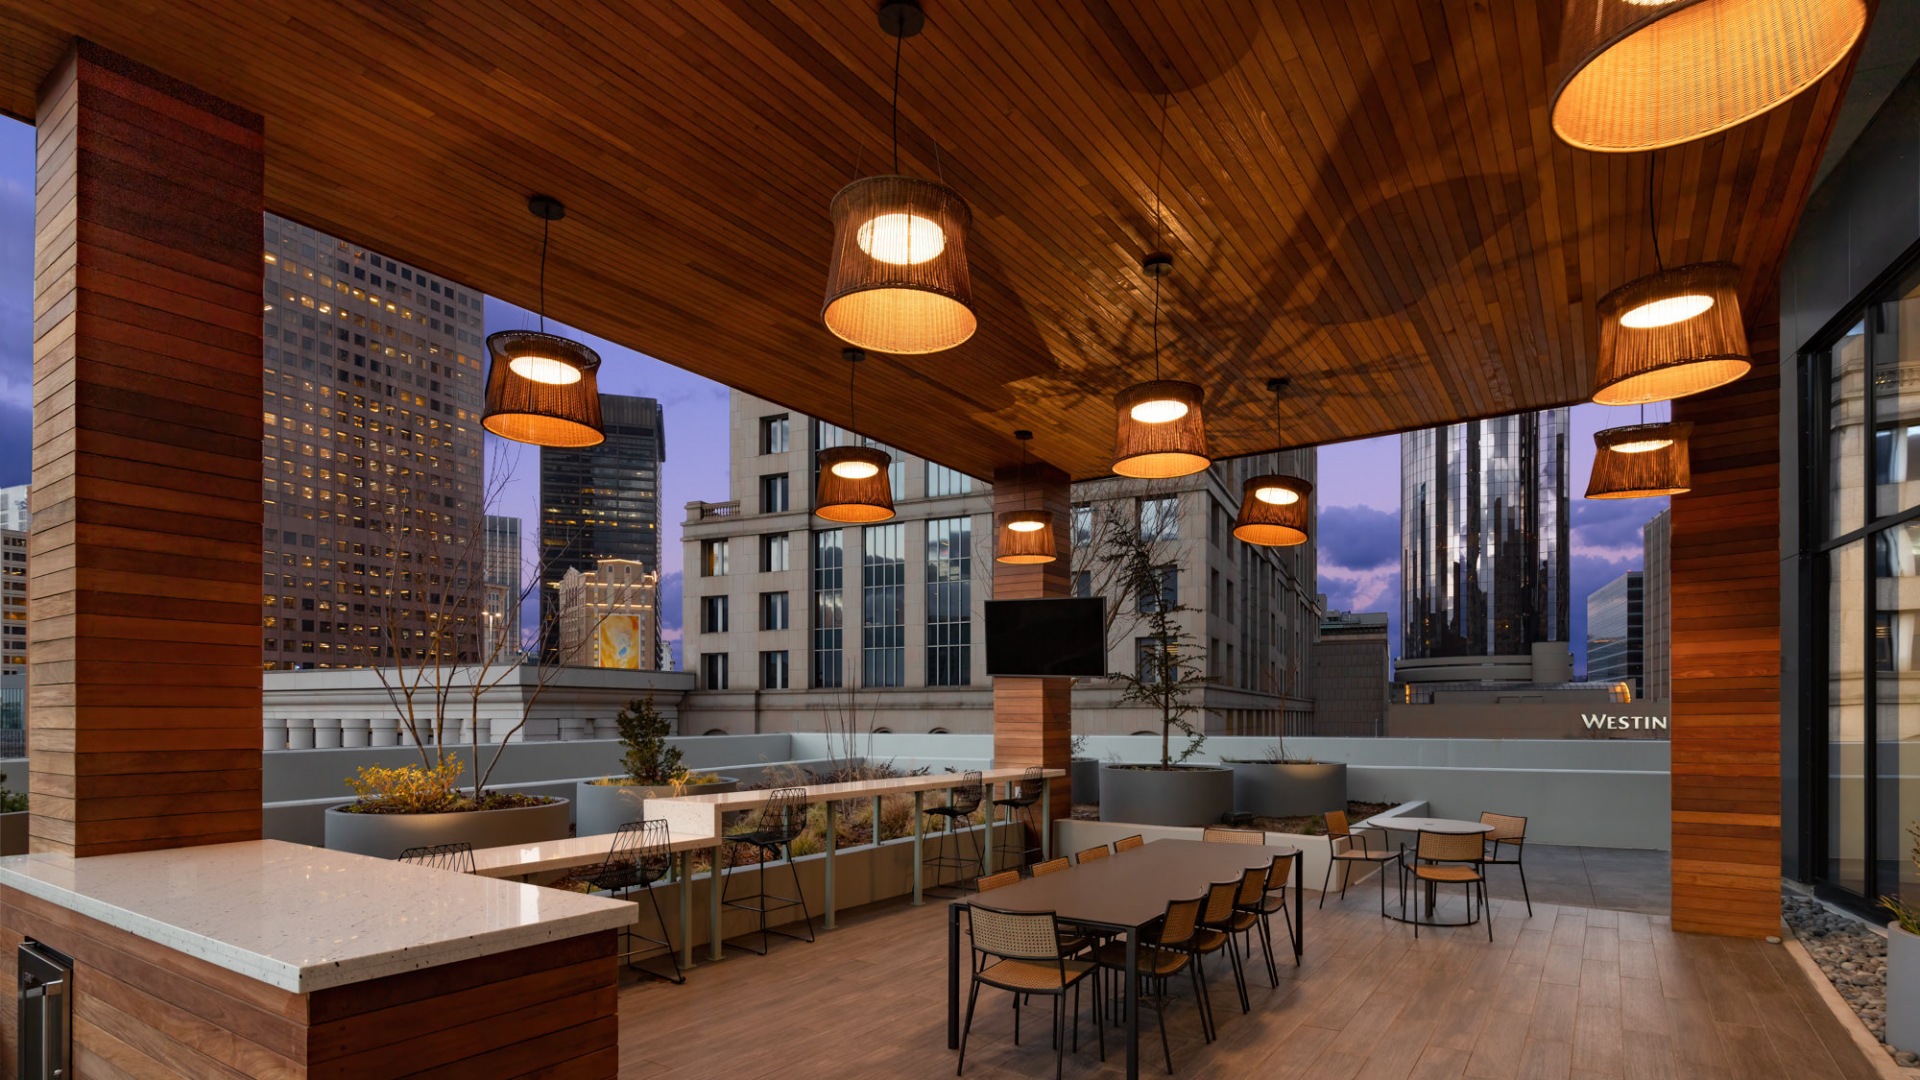 Peachtree rooftop outdoor pavilion bbq kitchen